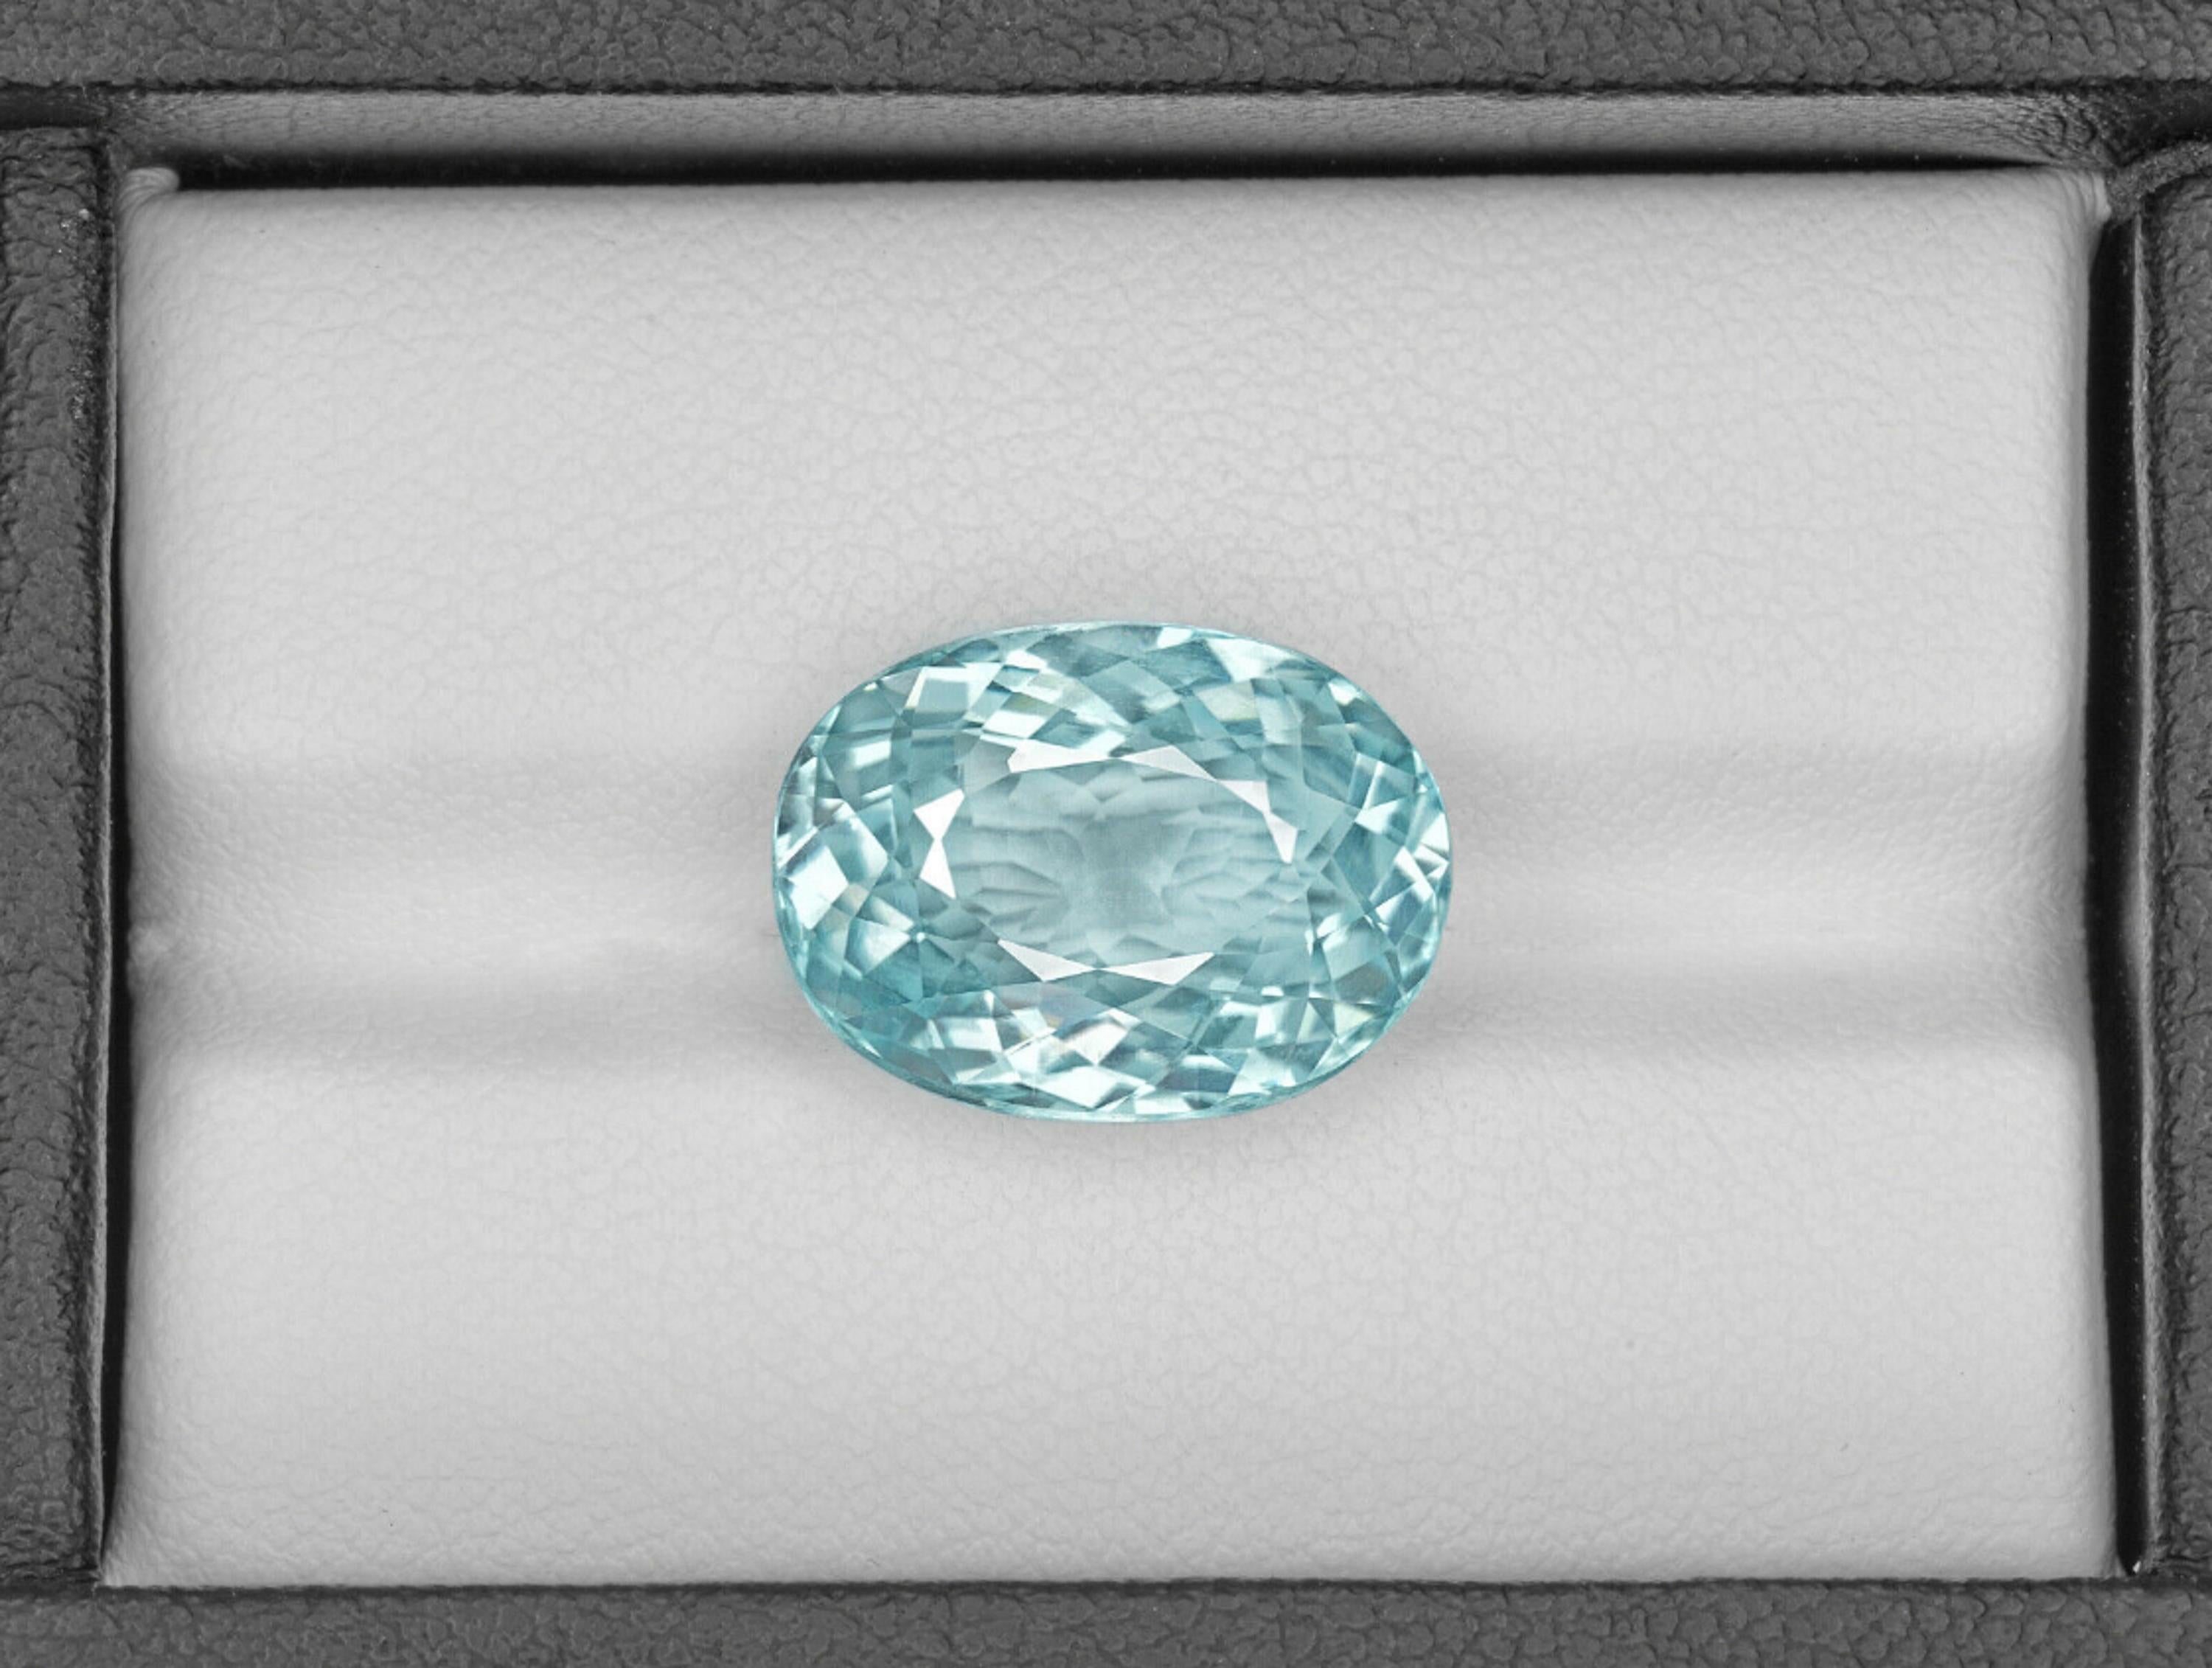 Amazing natural GIA certified paraiba tourmaline and diamond cocktail ring features a gorgeous paraiba tourmaline with electric teal color! It is complemented by a luxurious, diamond encrusted halo setting for a bold and glamorous